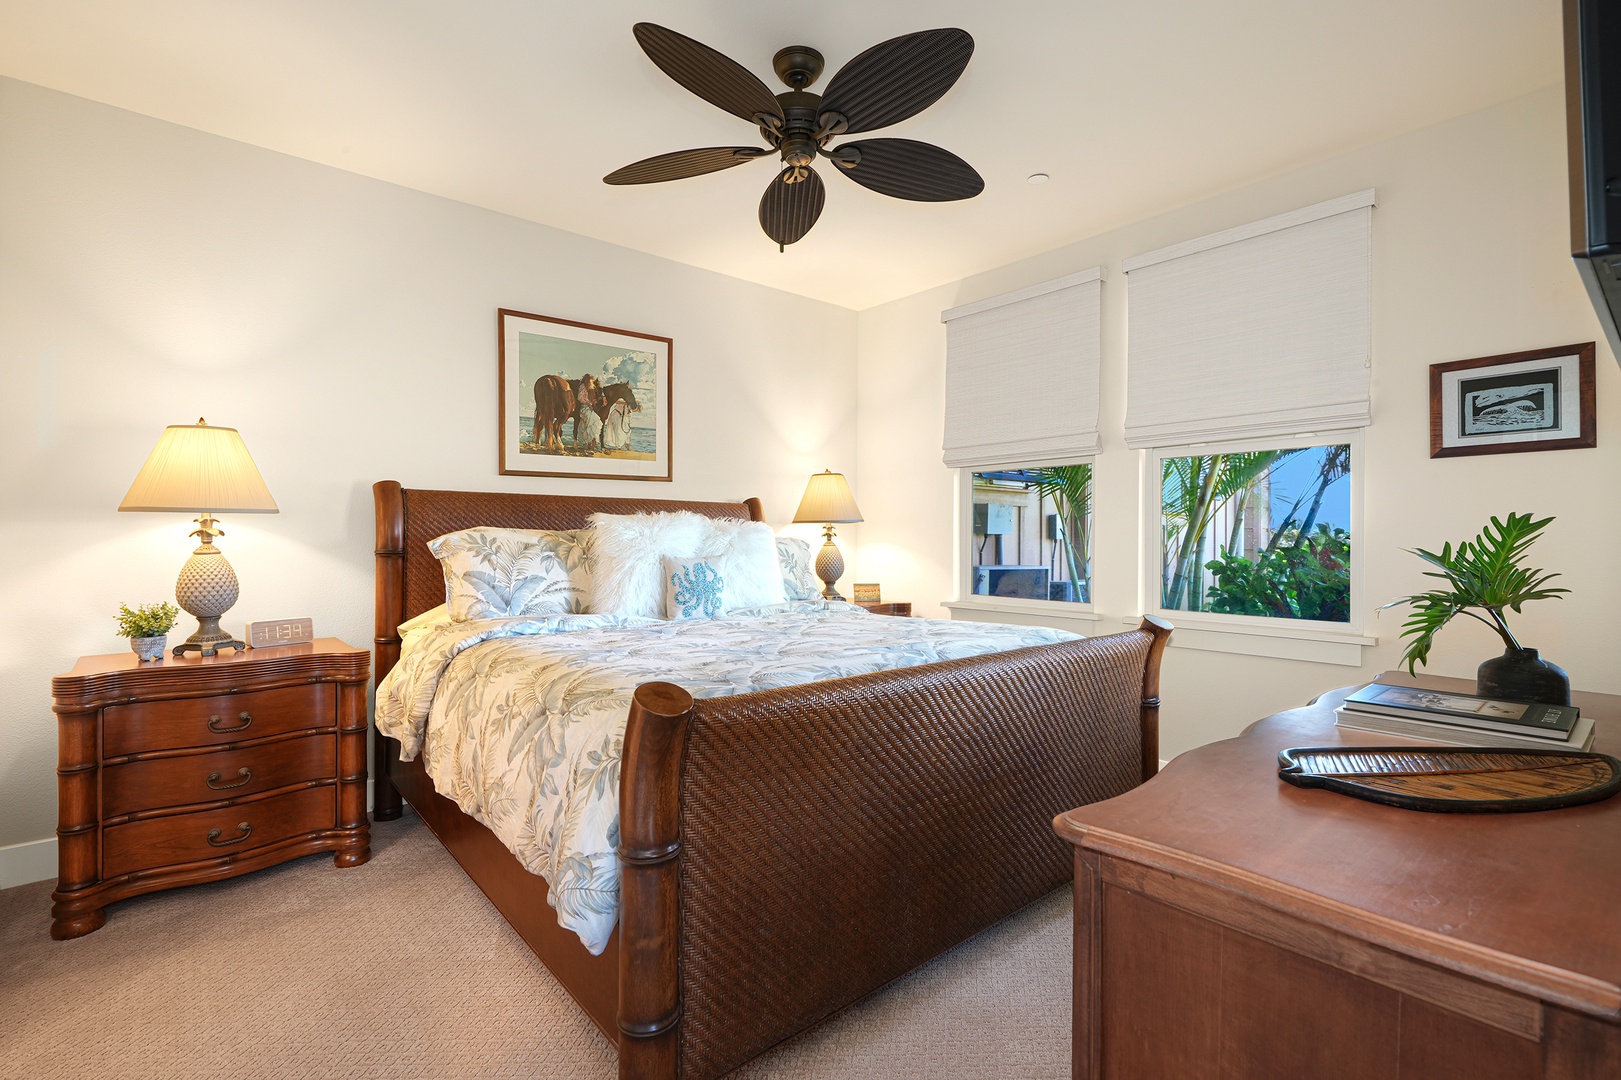 Koloa Vacation Rentals, Pili Mai 7J - Cozy guest bedroom two offers a king bed and natural lighting.